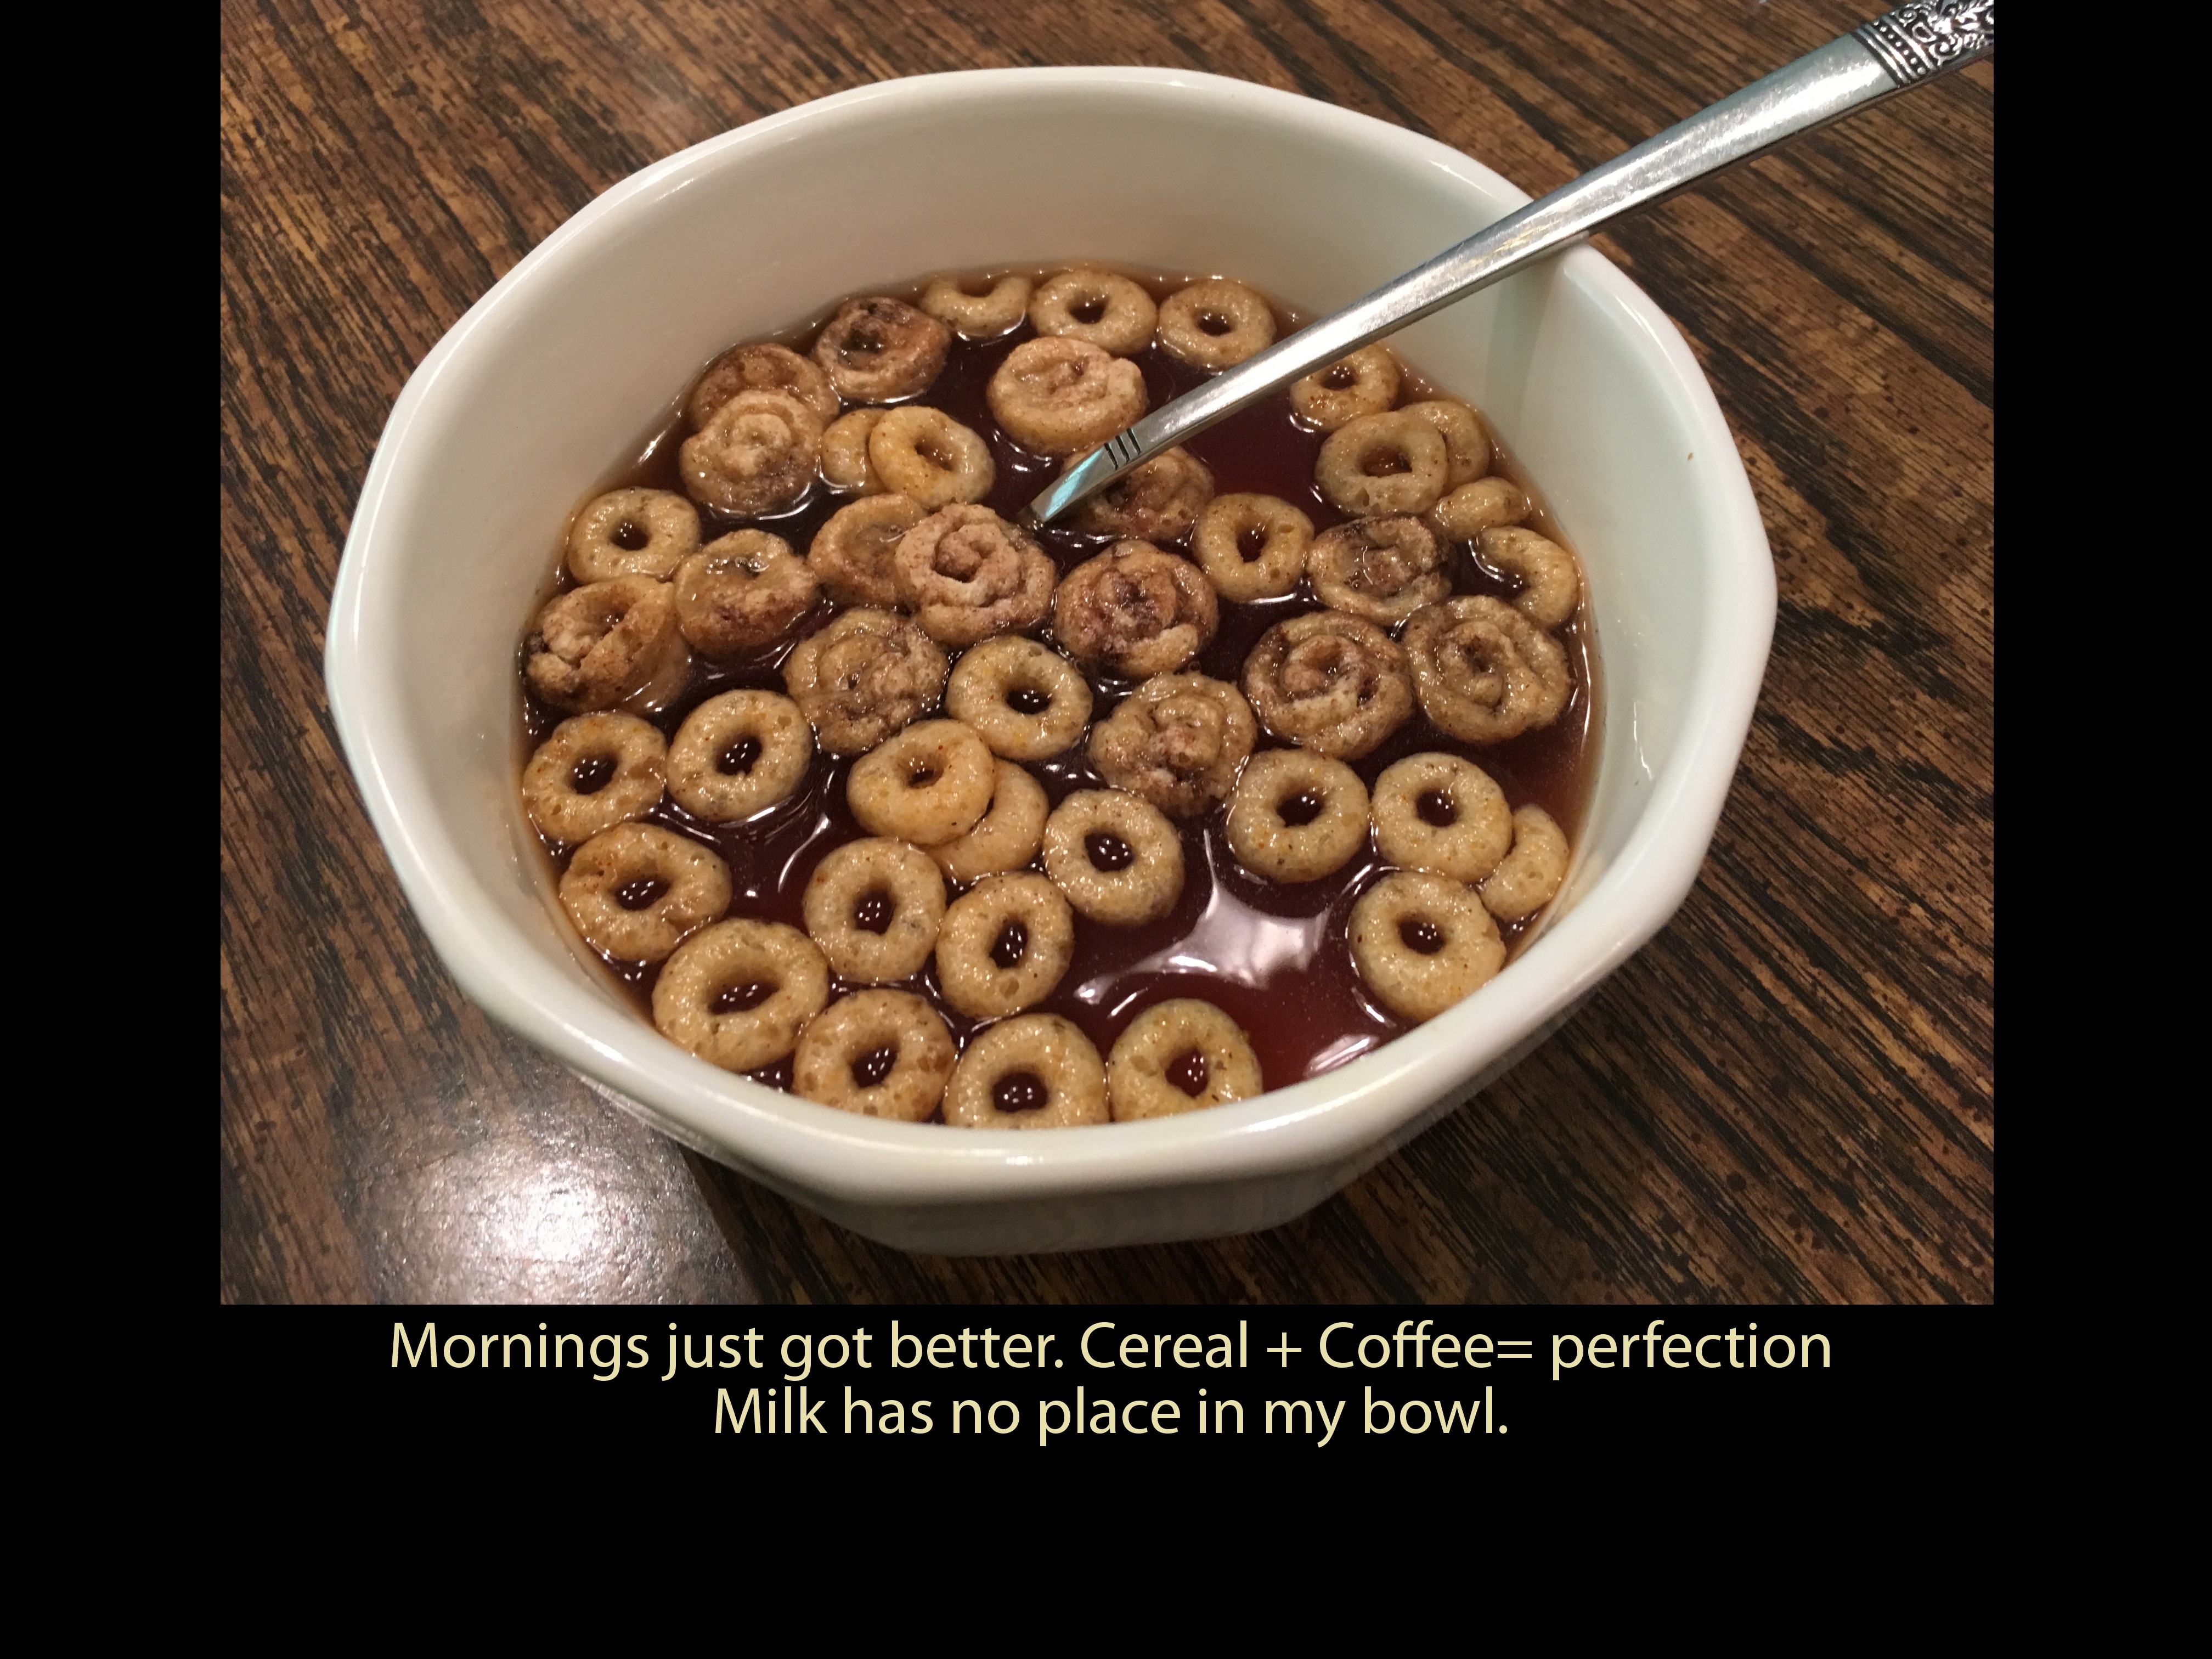 vegetarian food - Mornings just got better. Cereal Coffeer perfection Milk has no place in my bowl.